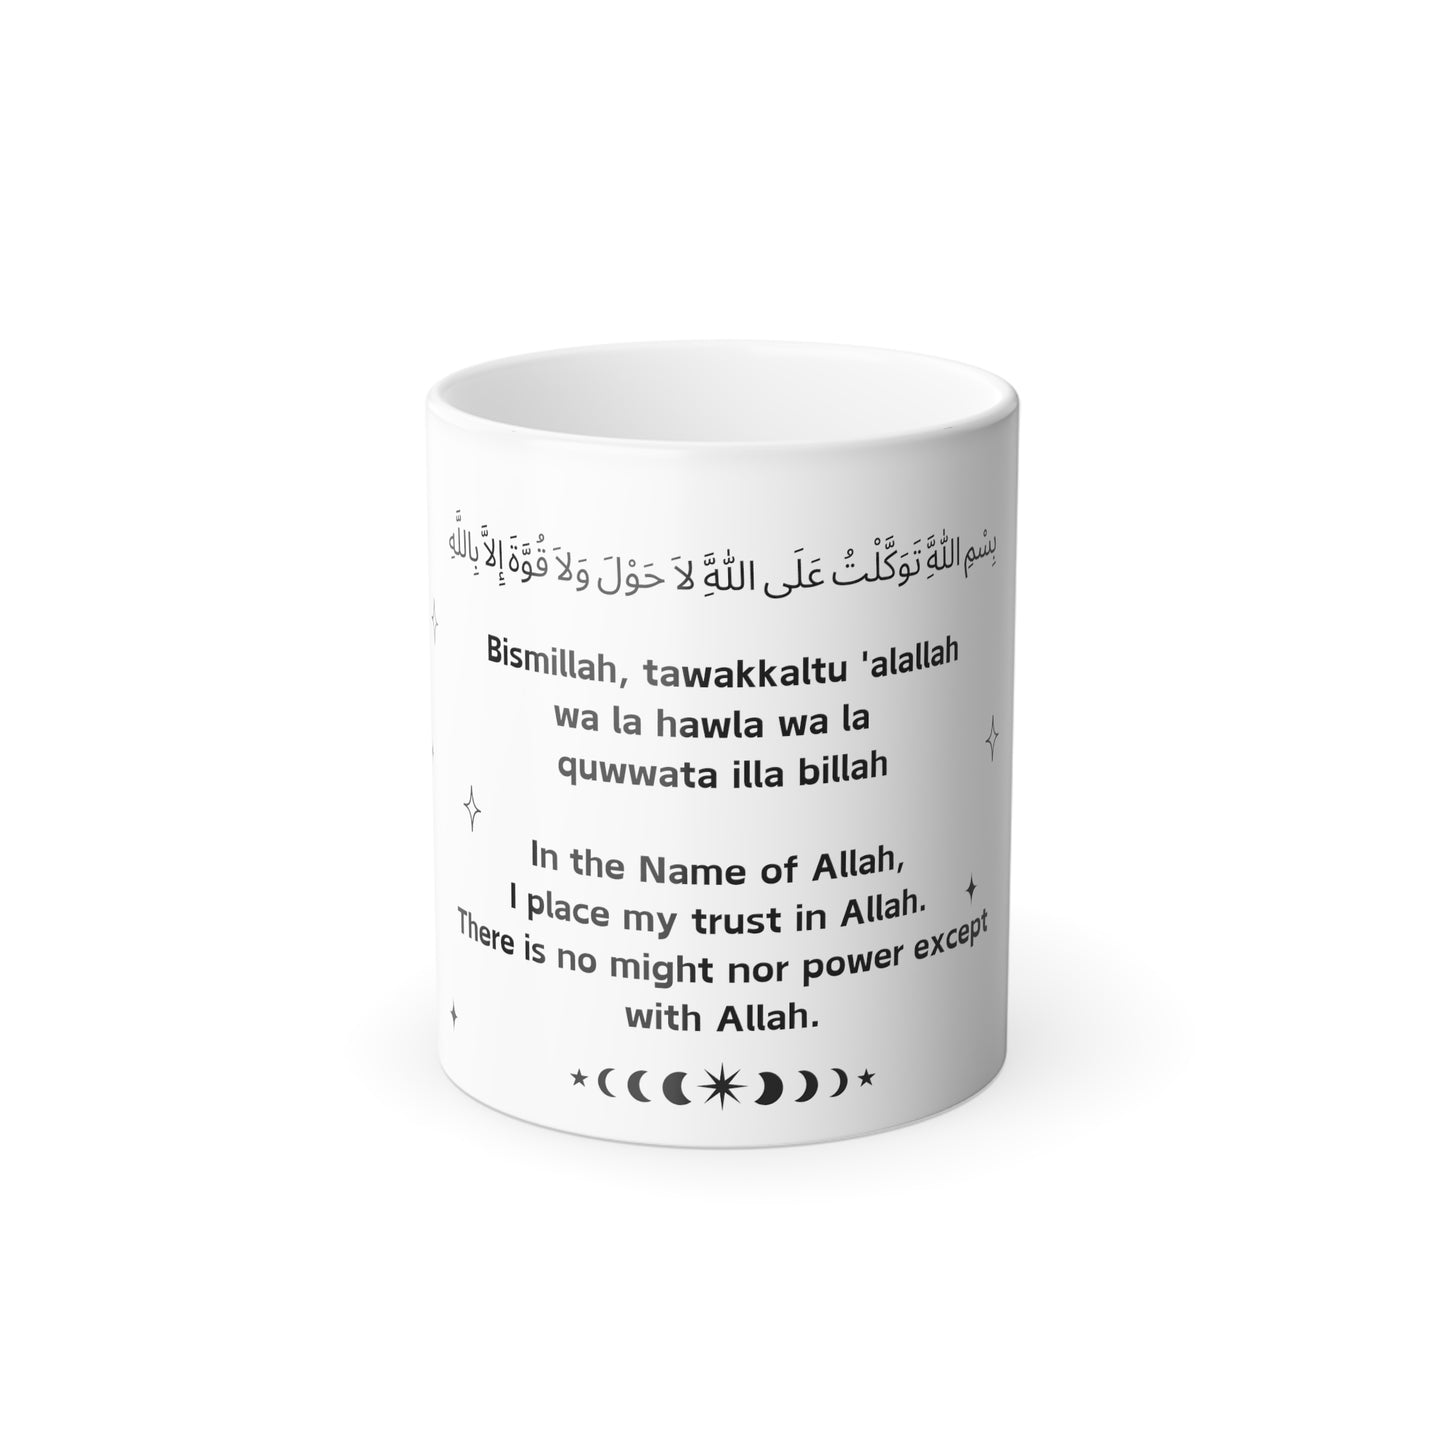 In the Name of Allah, I place my trust in Allah. There is no might nor power except with Allah | Color Changing Mug in 11oz